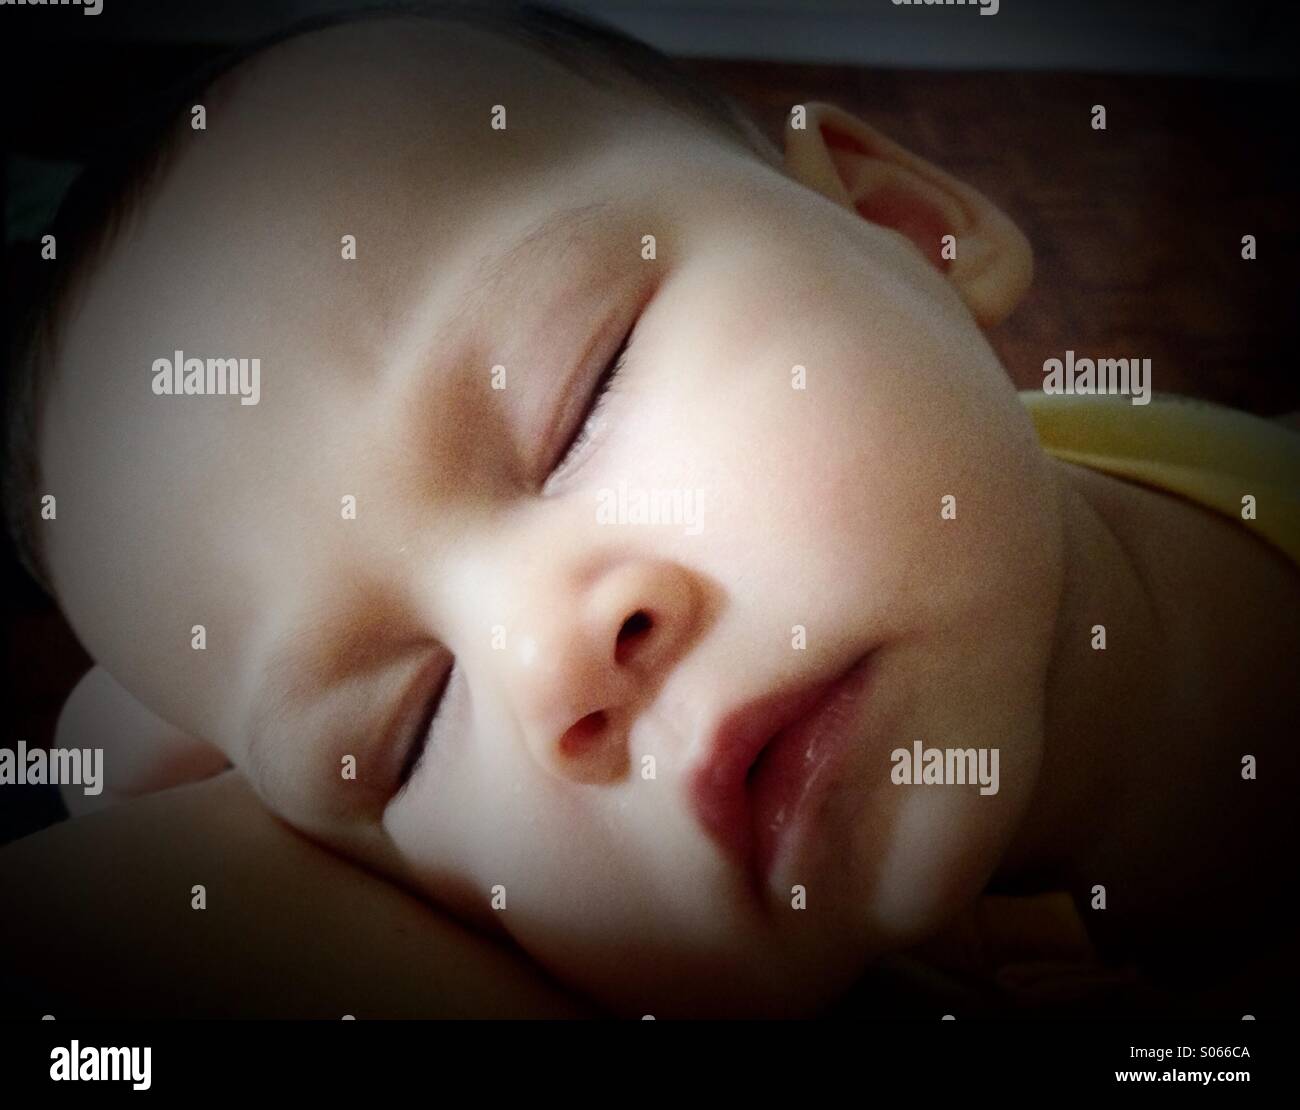 Baby with high fever resting on daddy Stock Photo